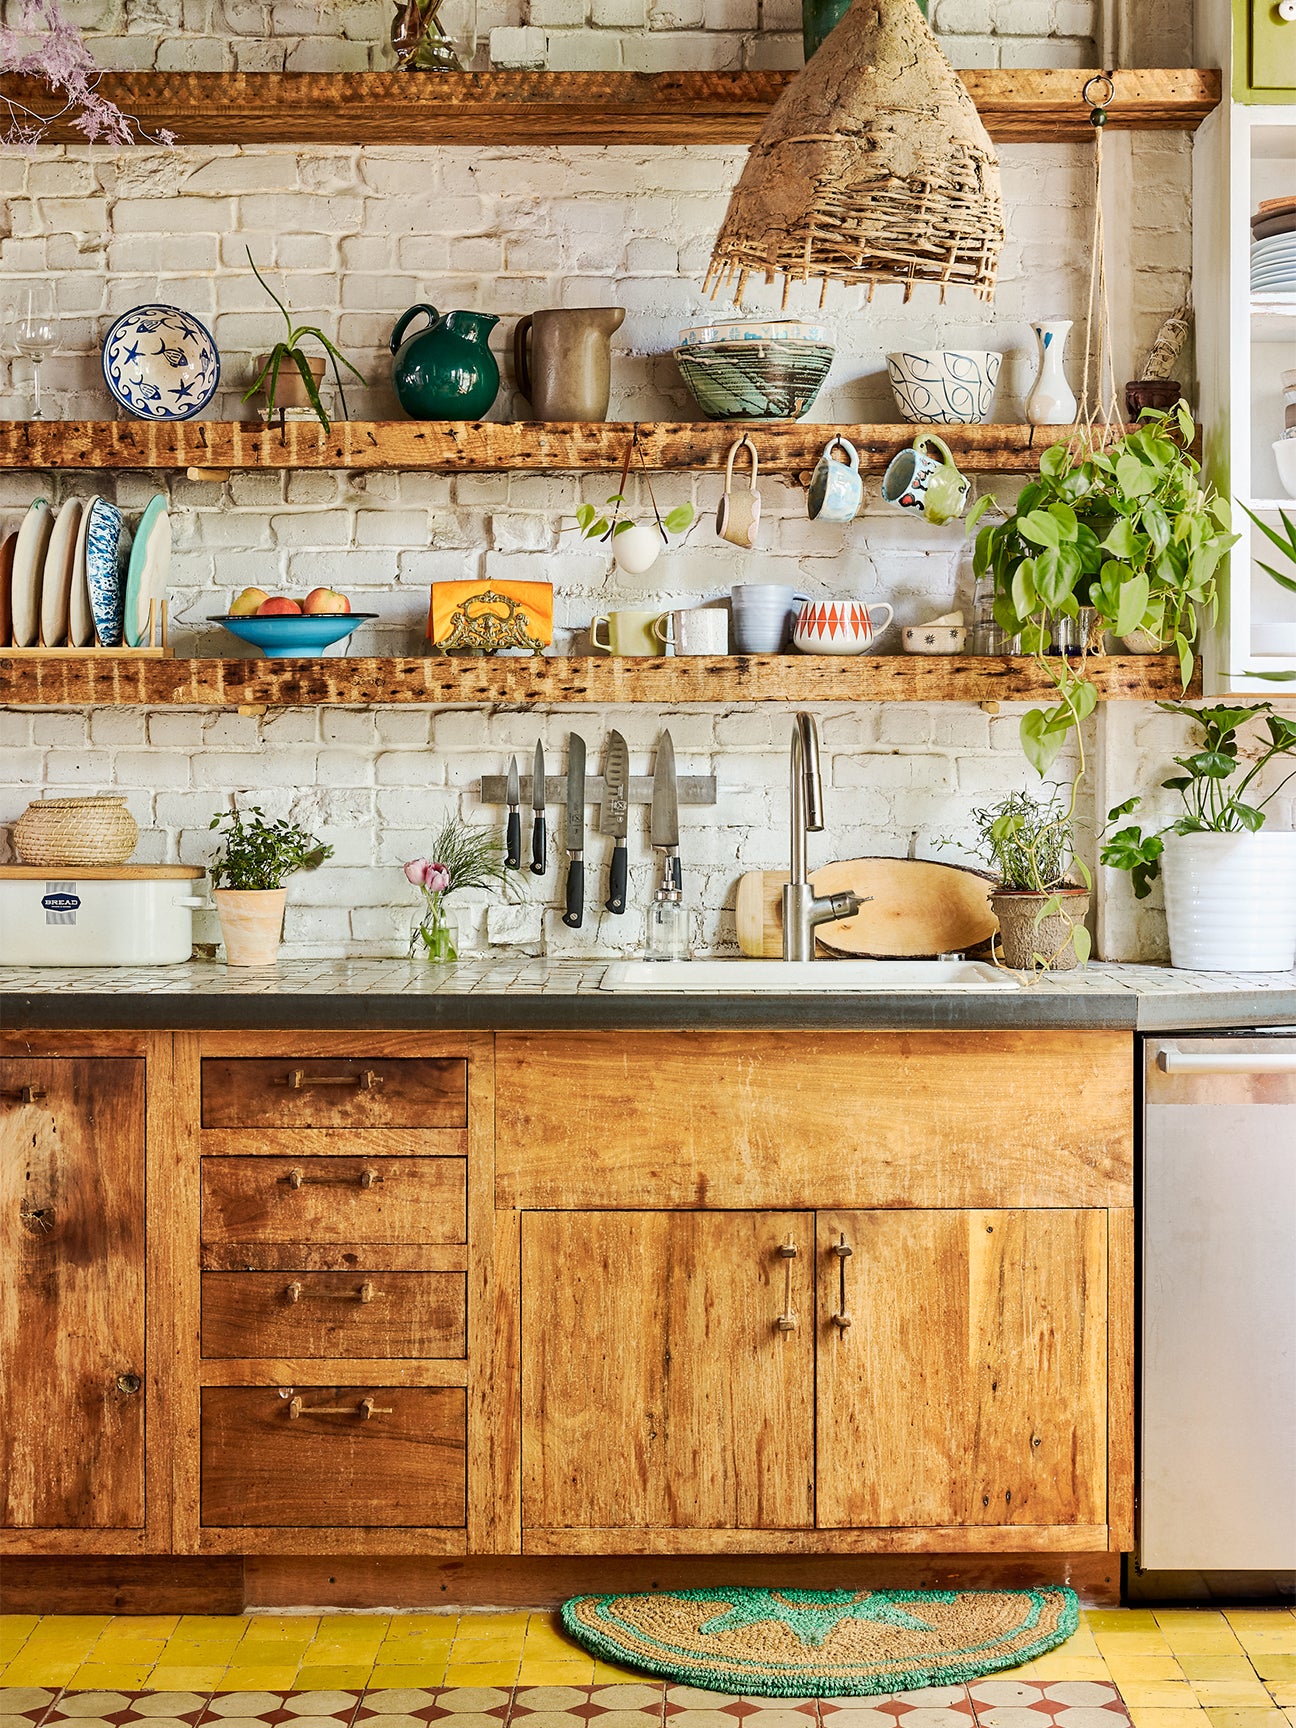 Reclaimed Kitchen Cabinets